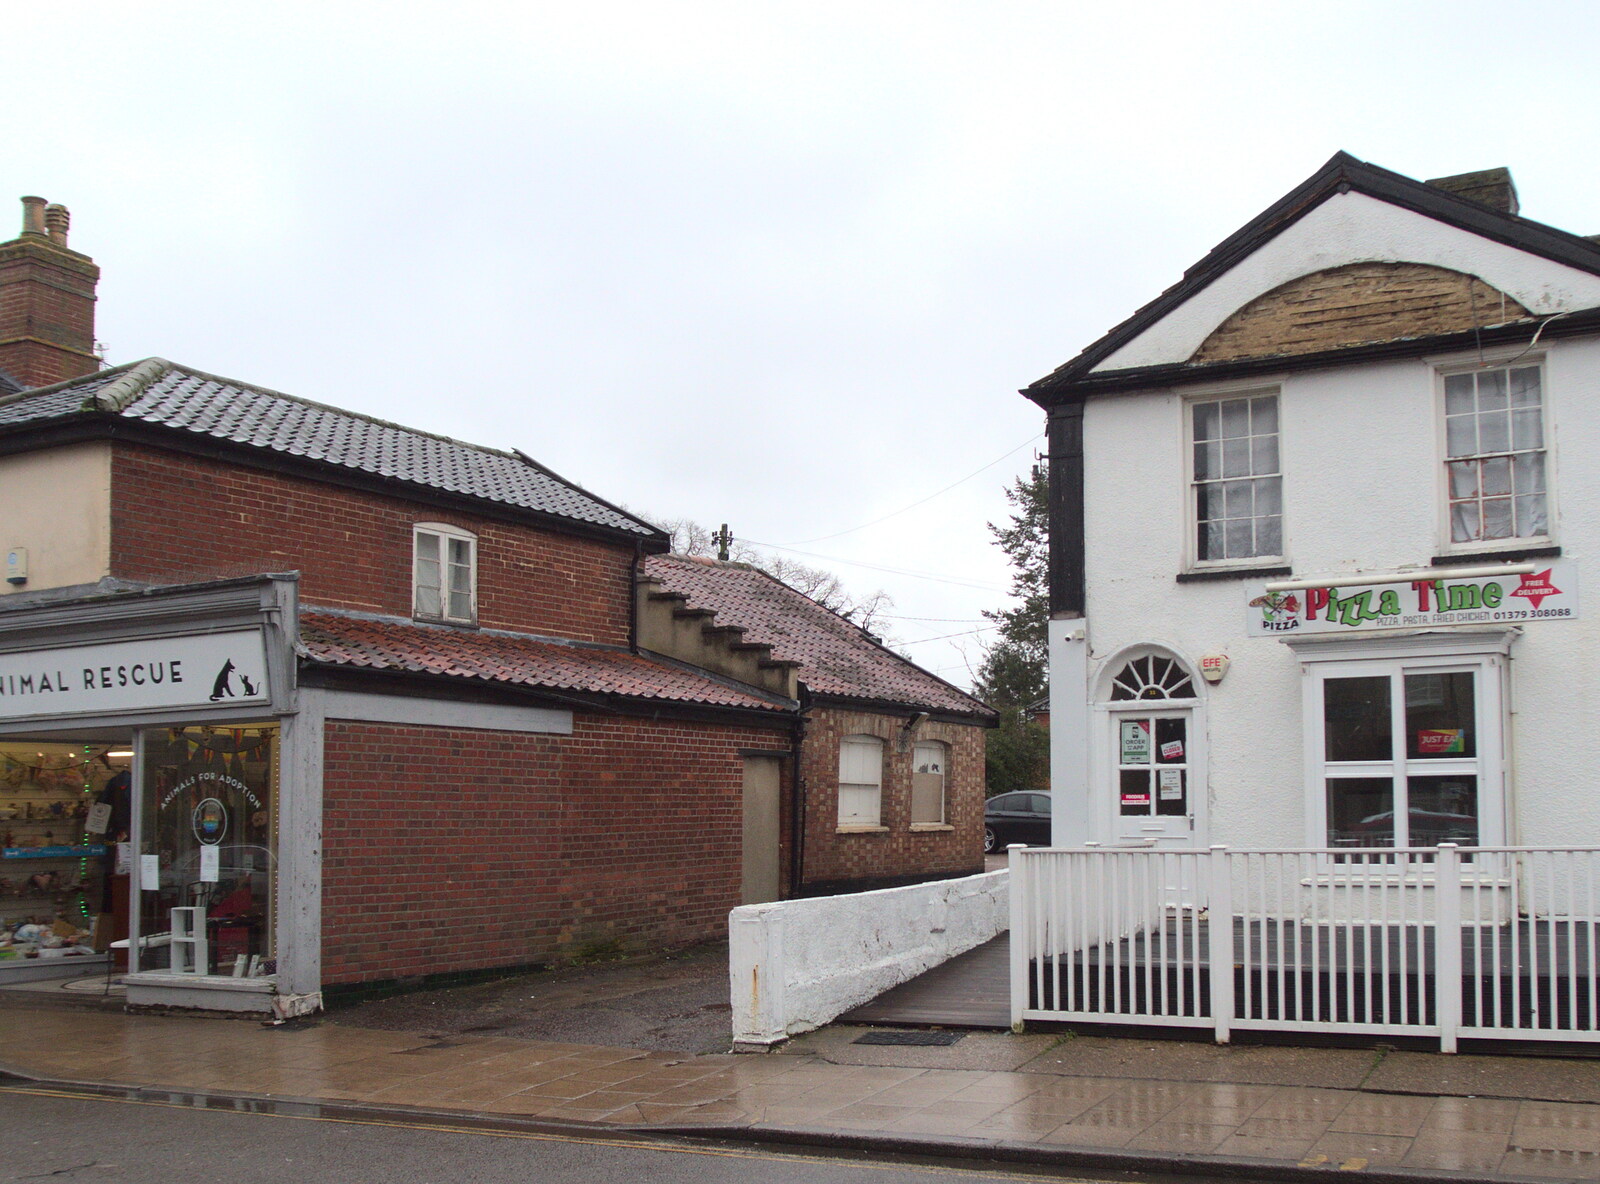 The pizza place has lost part of the building from Dinner at the Oaksmere and a Ride to Eye, Suffolk - 5th January 2022